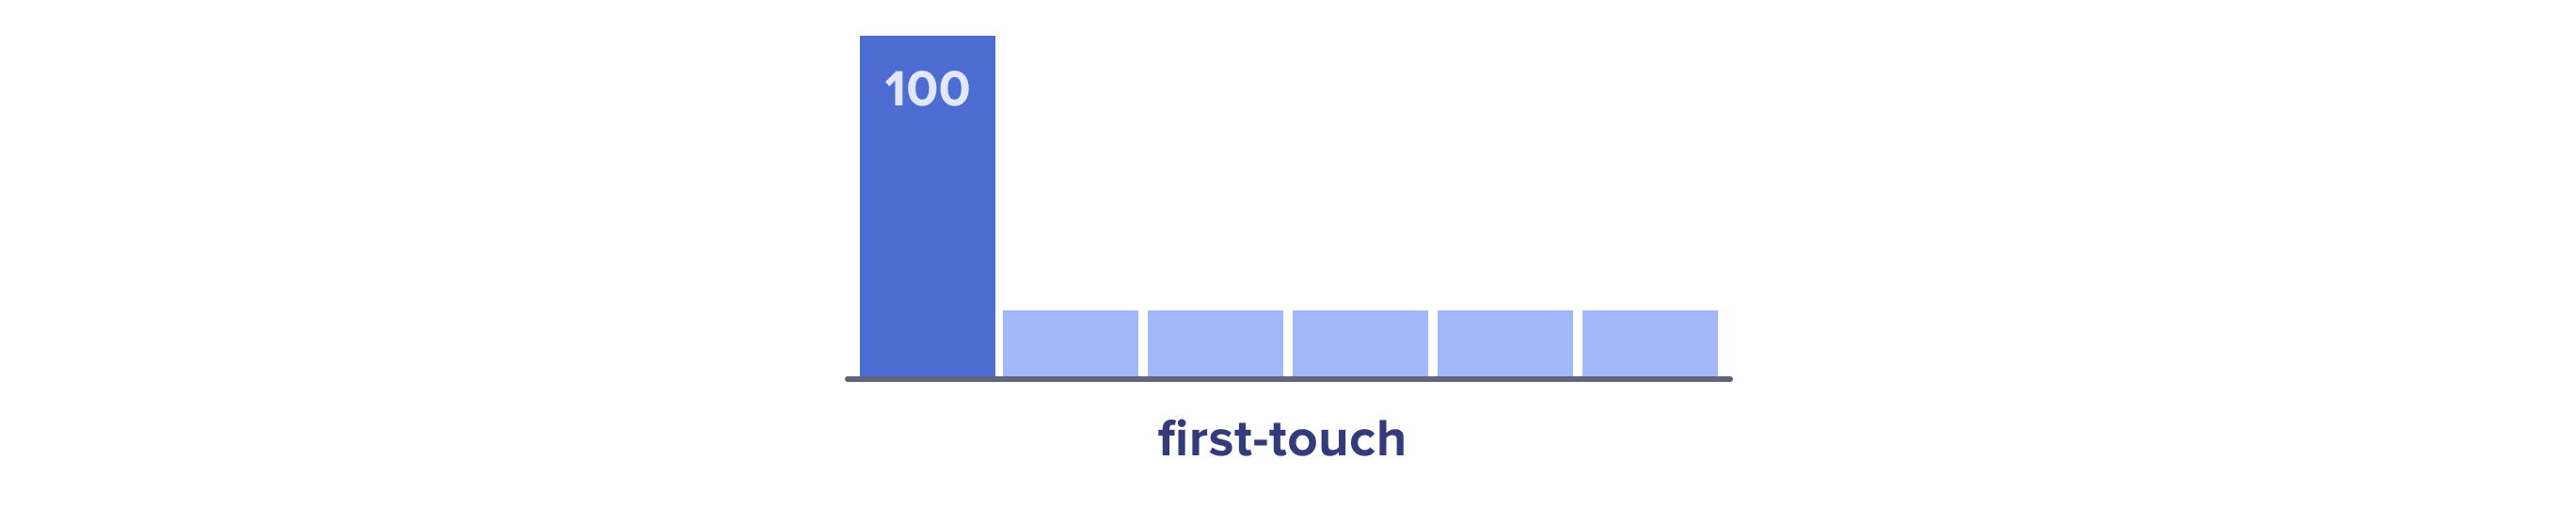 First touch attribution model